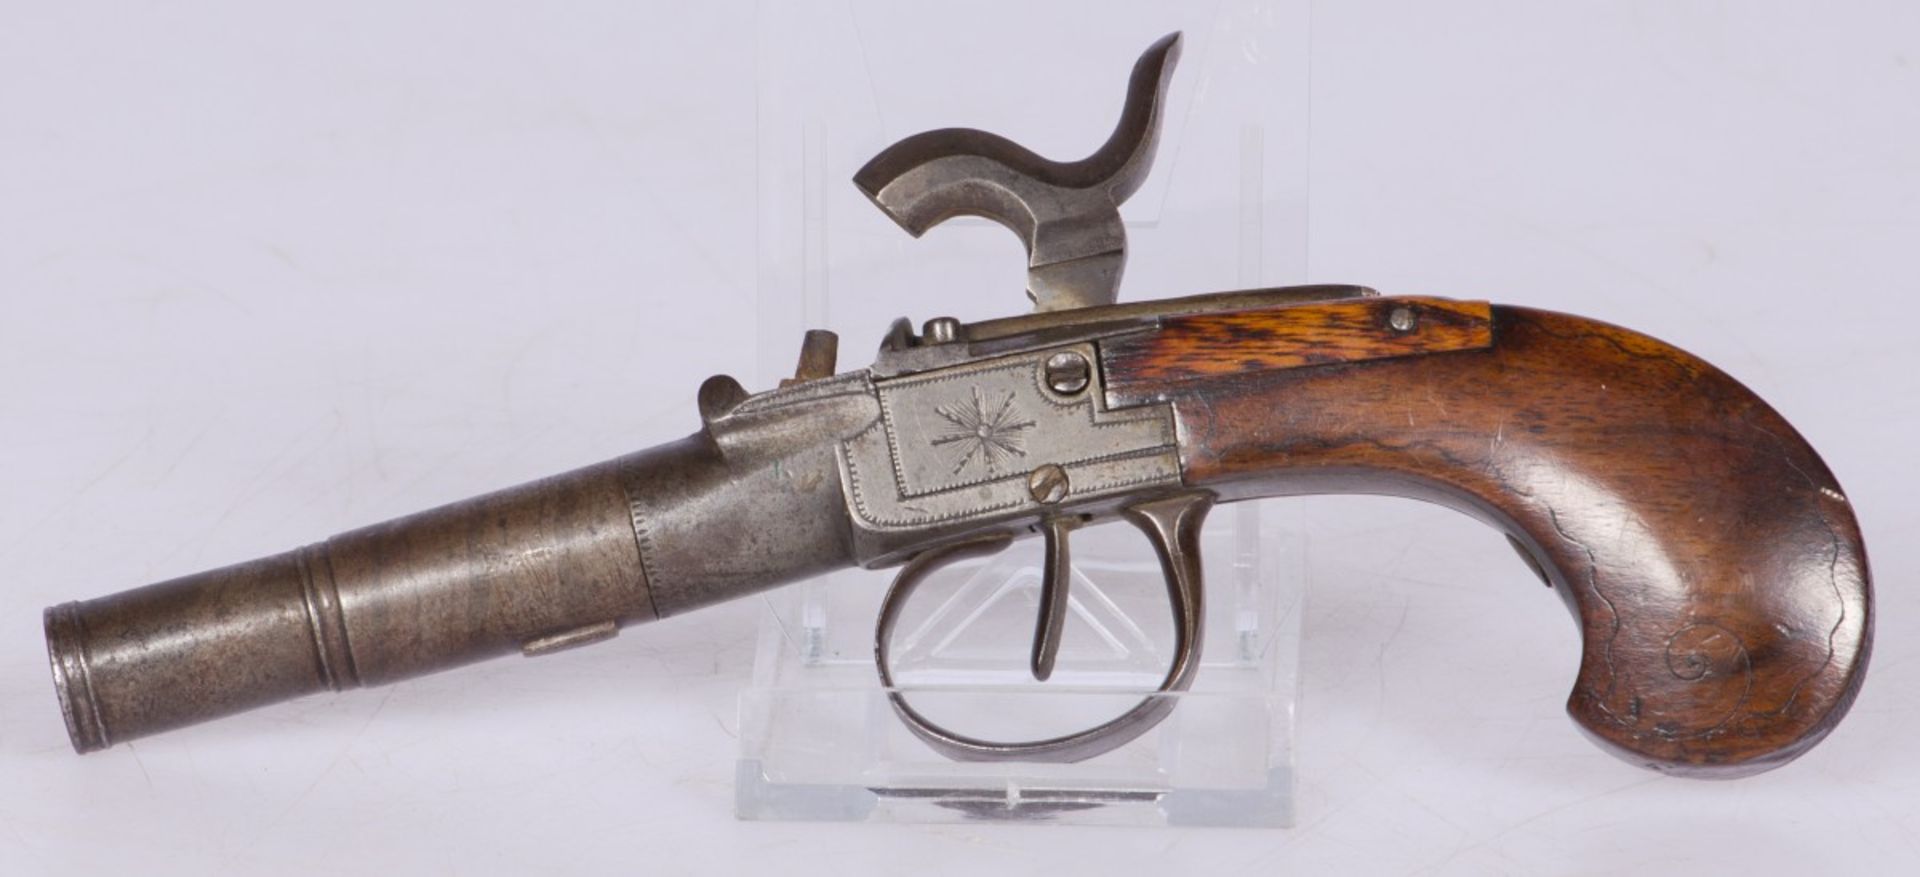 A recussion equestrian pistol, France(?), 19th century.